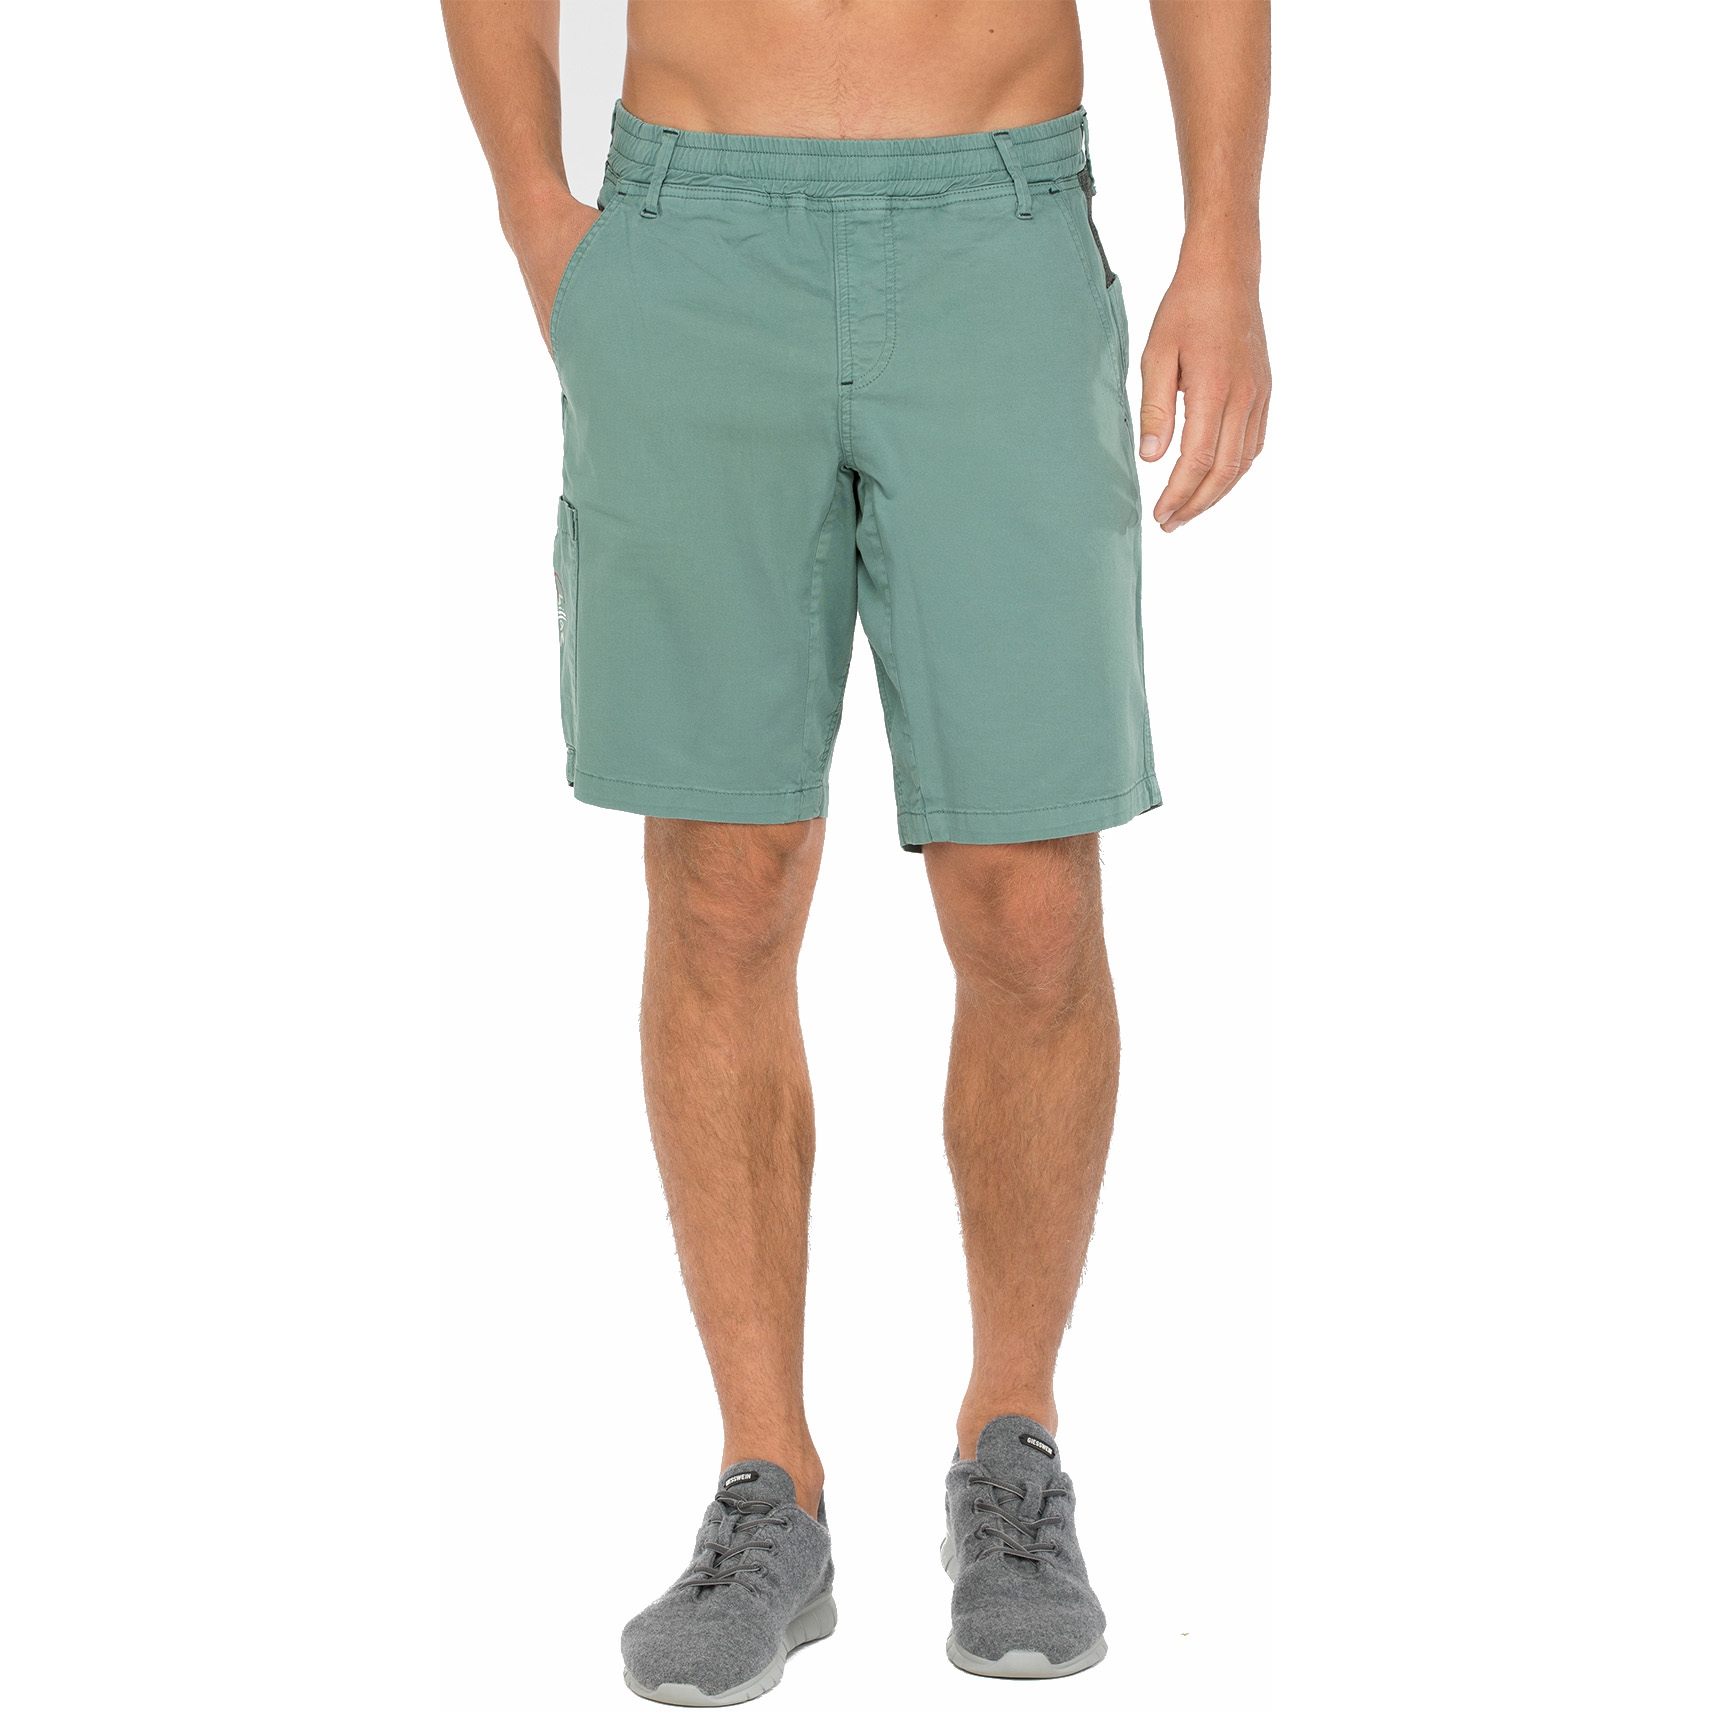 Picture of Chillaz Neo Shorts Men - green